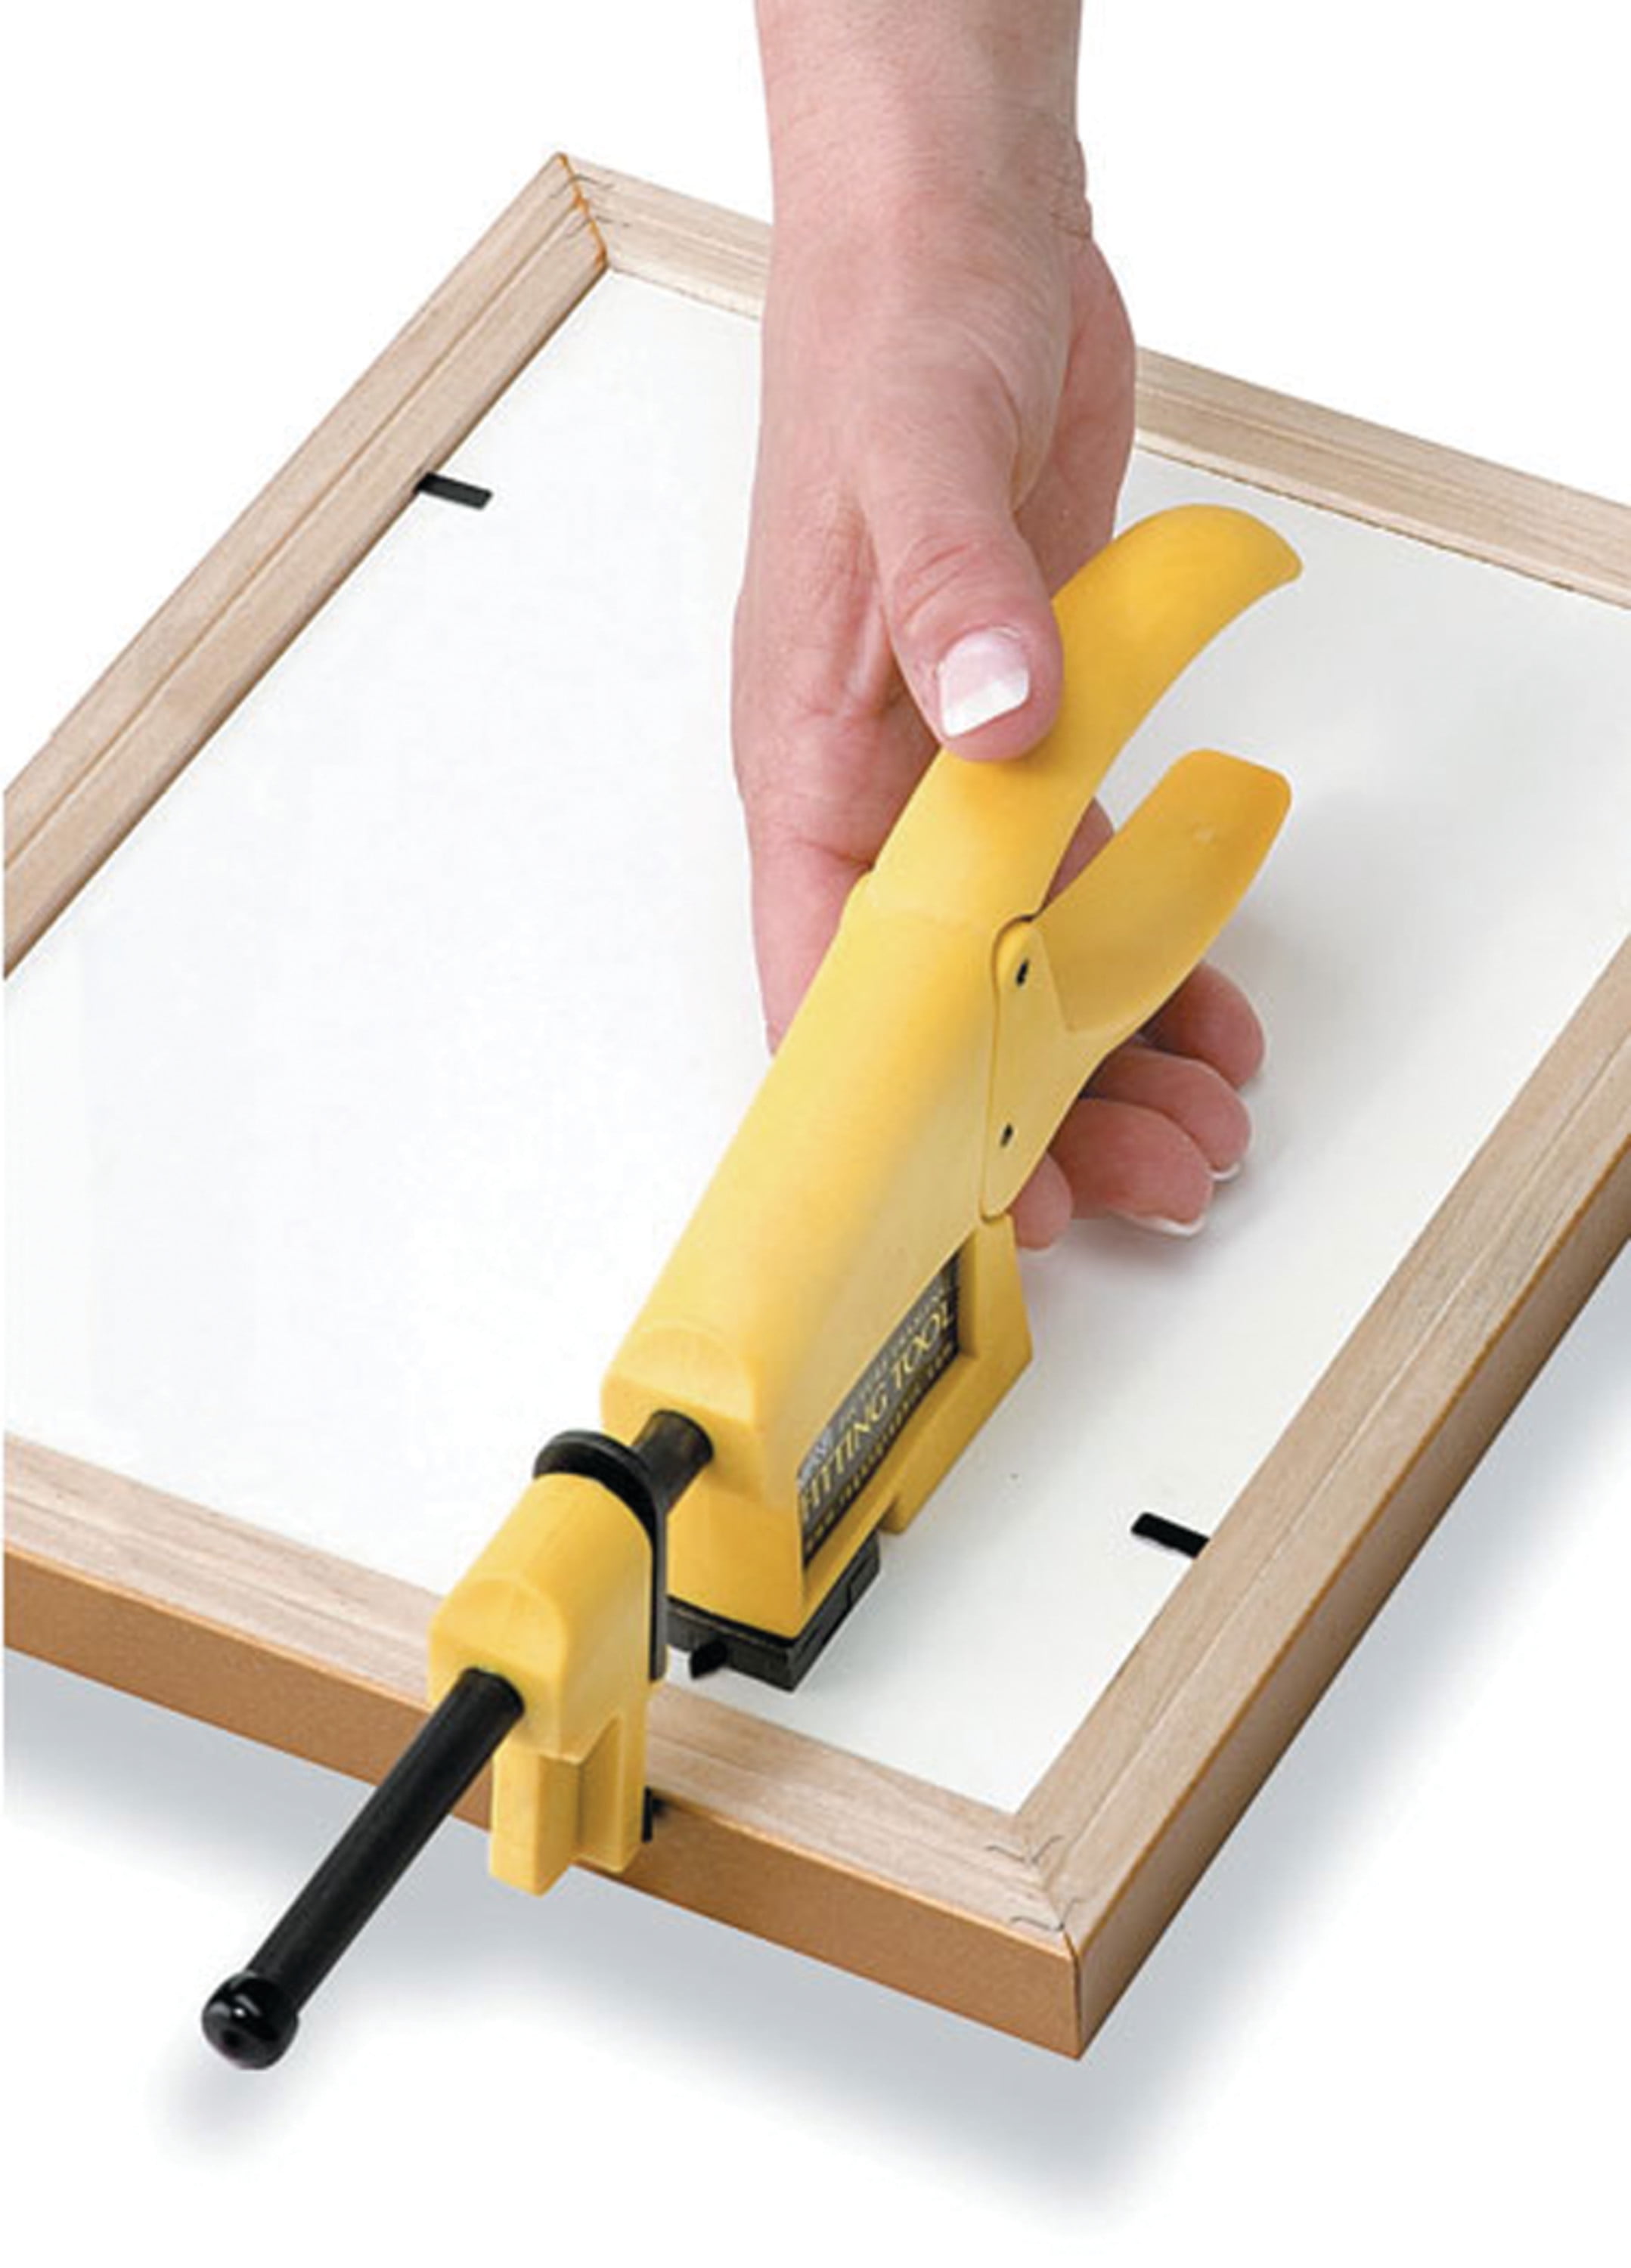 Logan Framing tools for Do-It-Yourself framing!